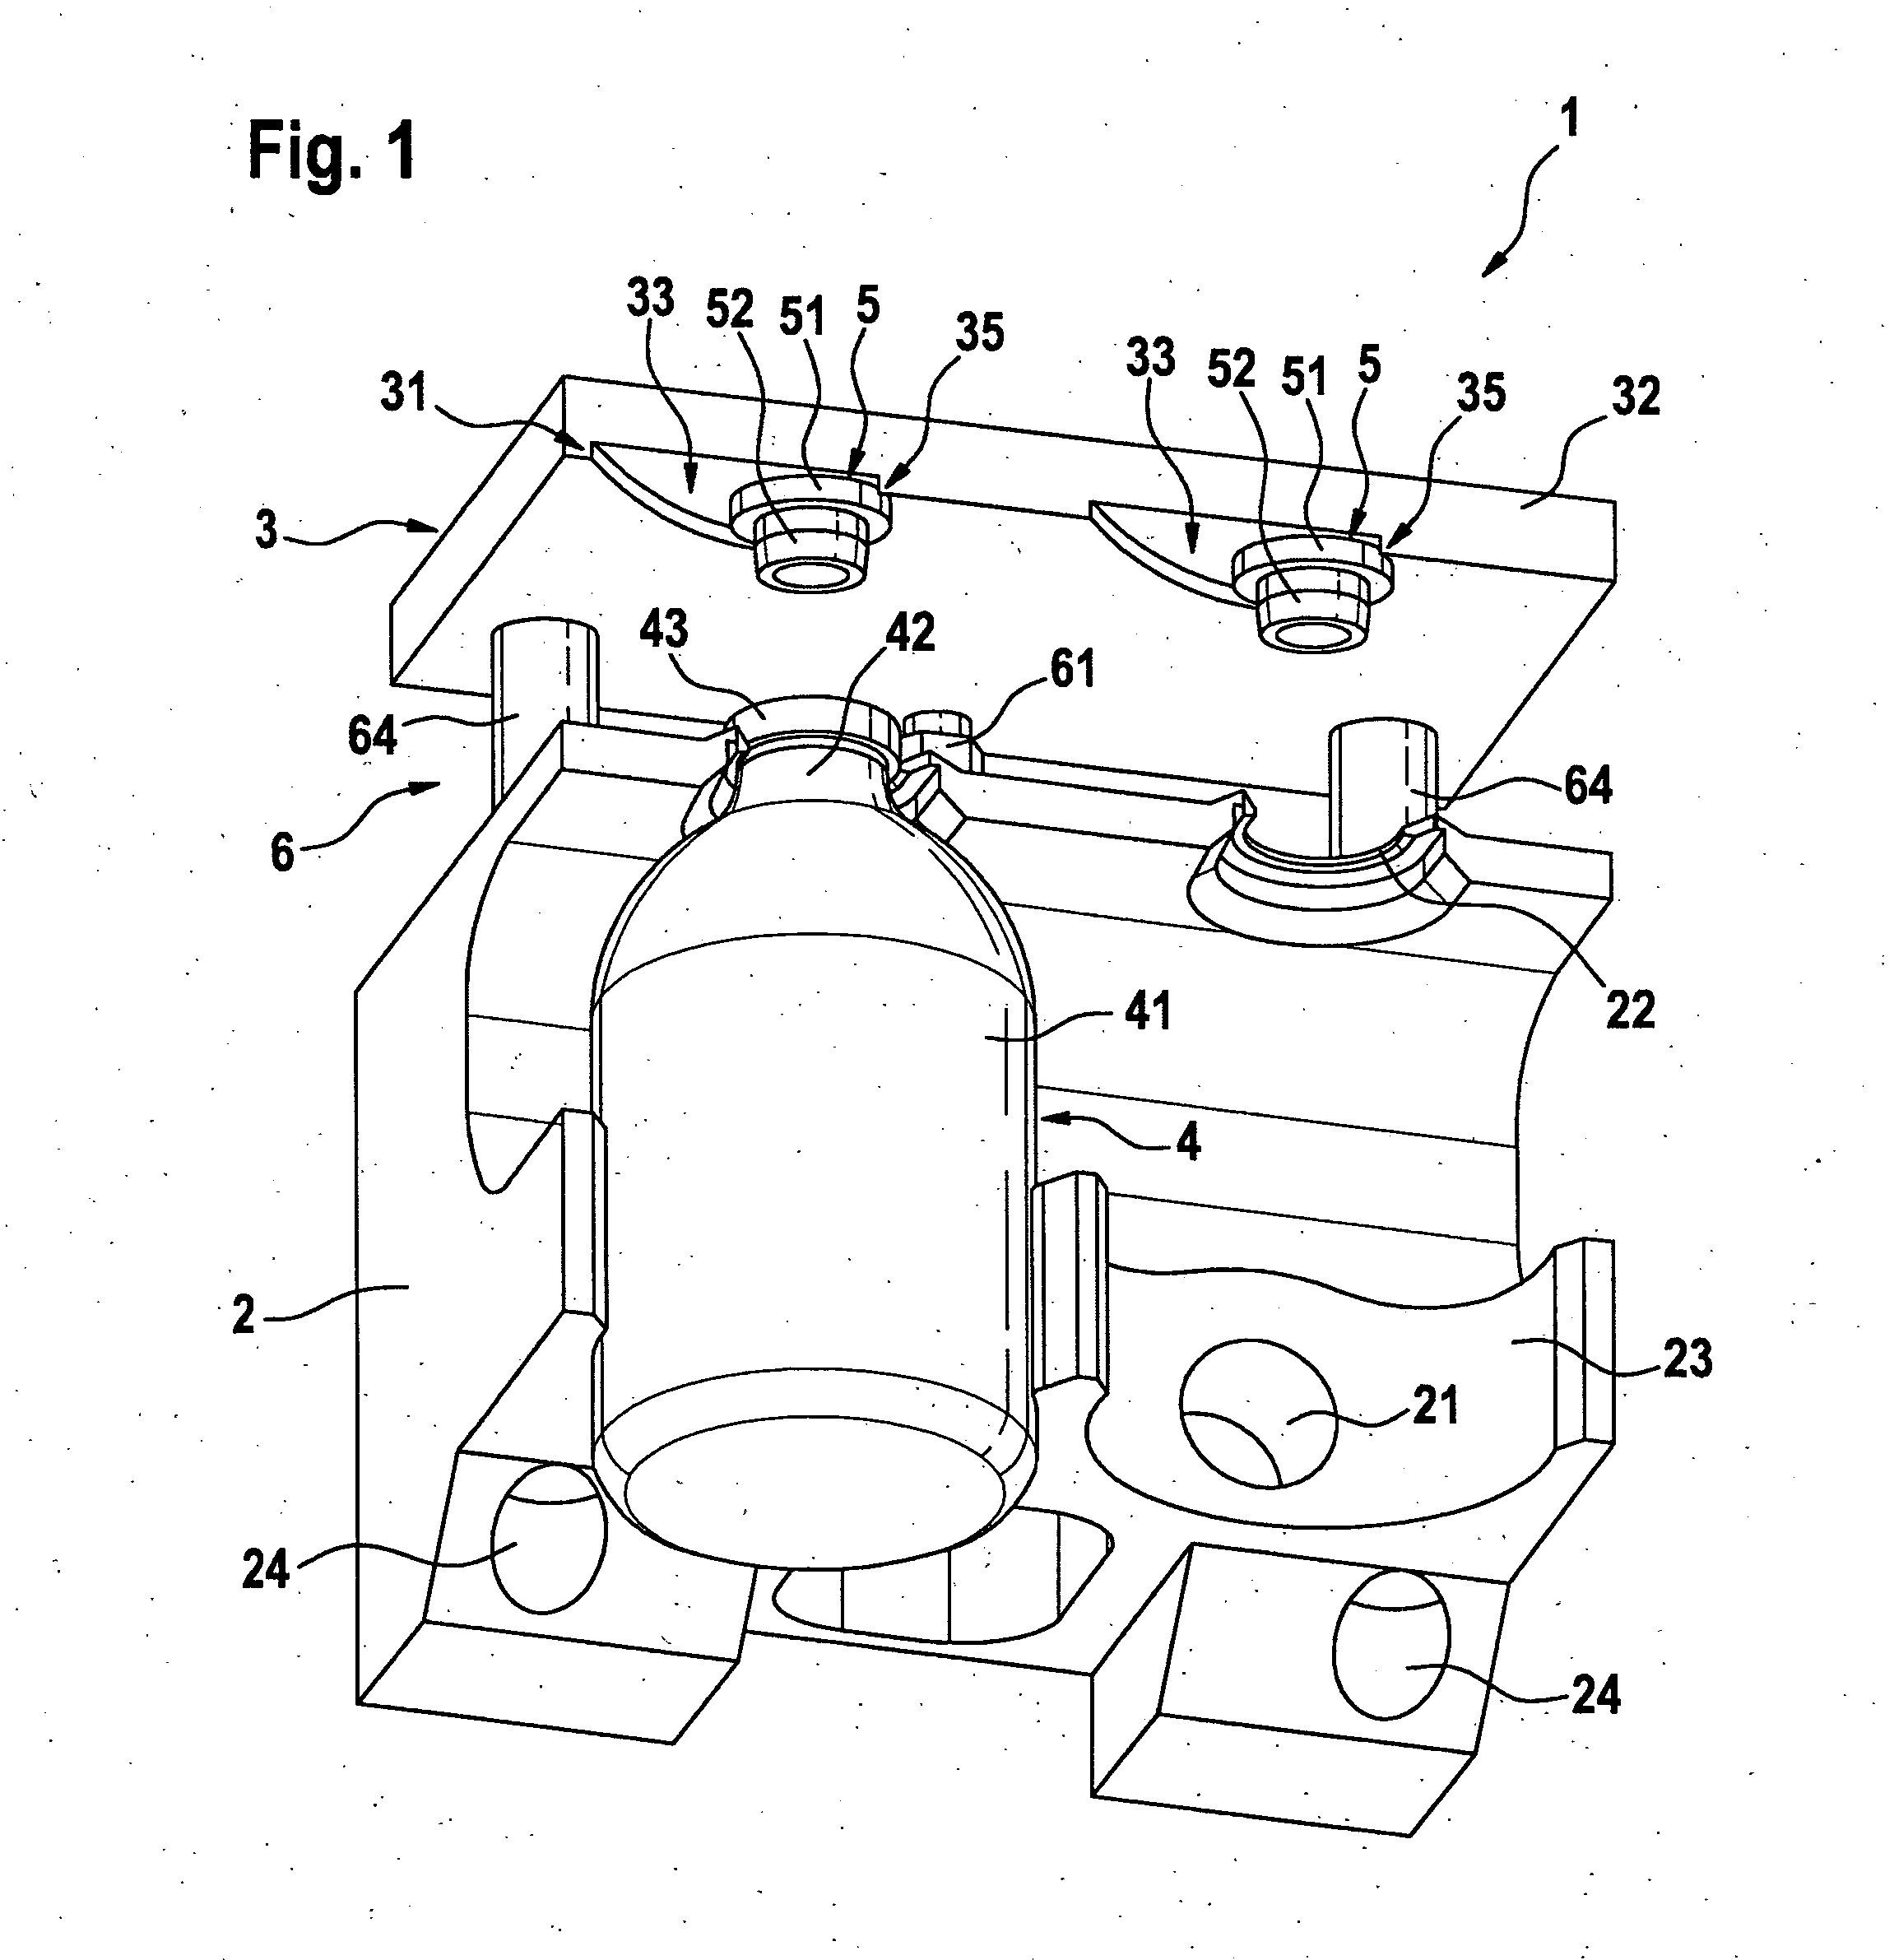 Method for closing containers by means of a closure in a gripping device